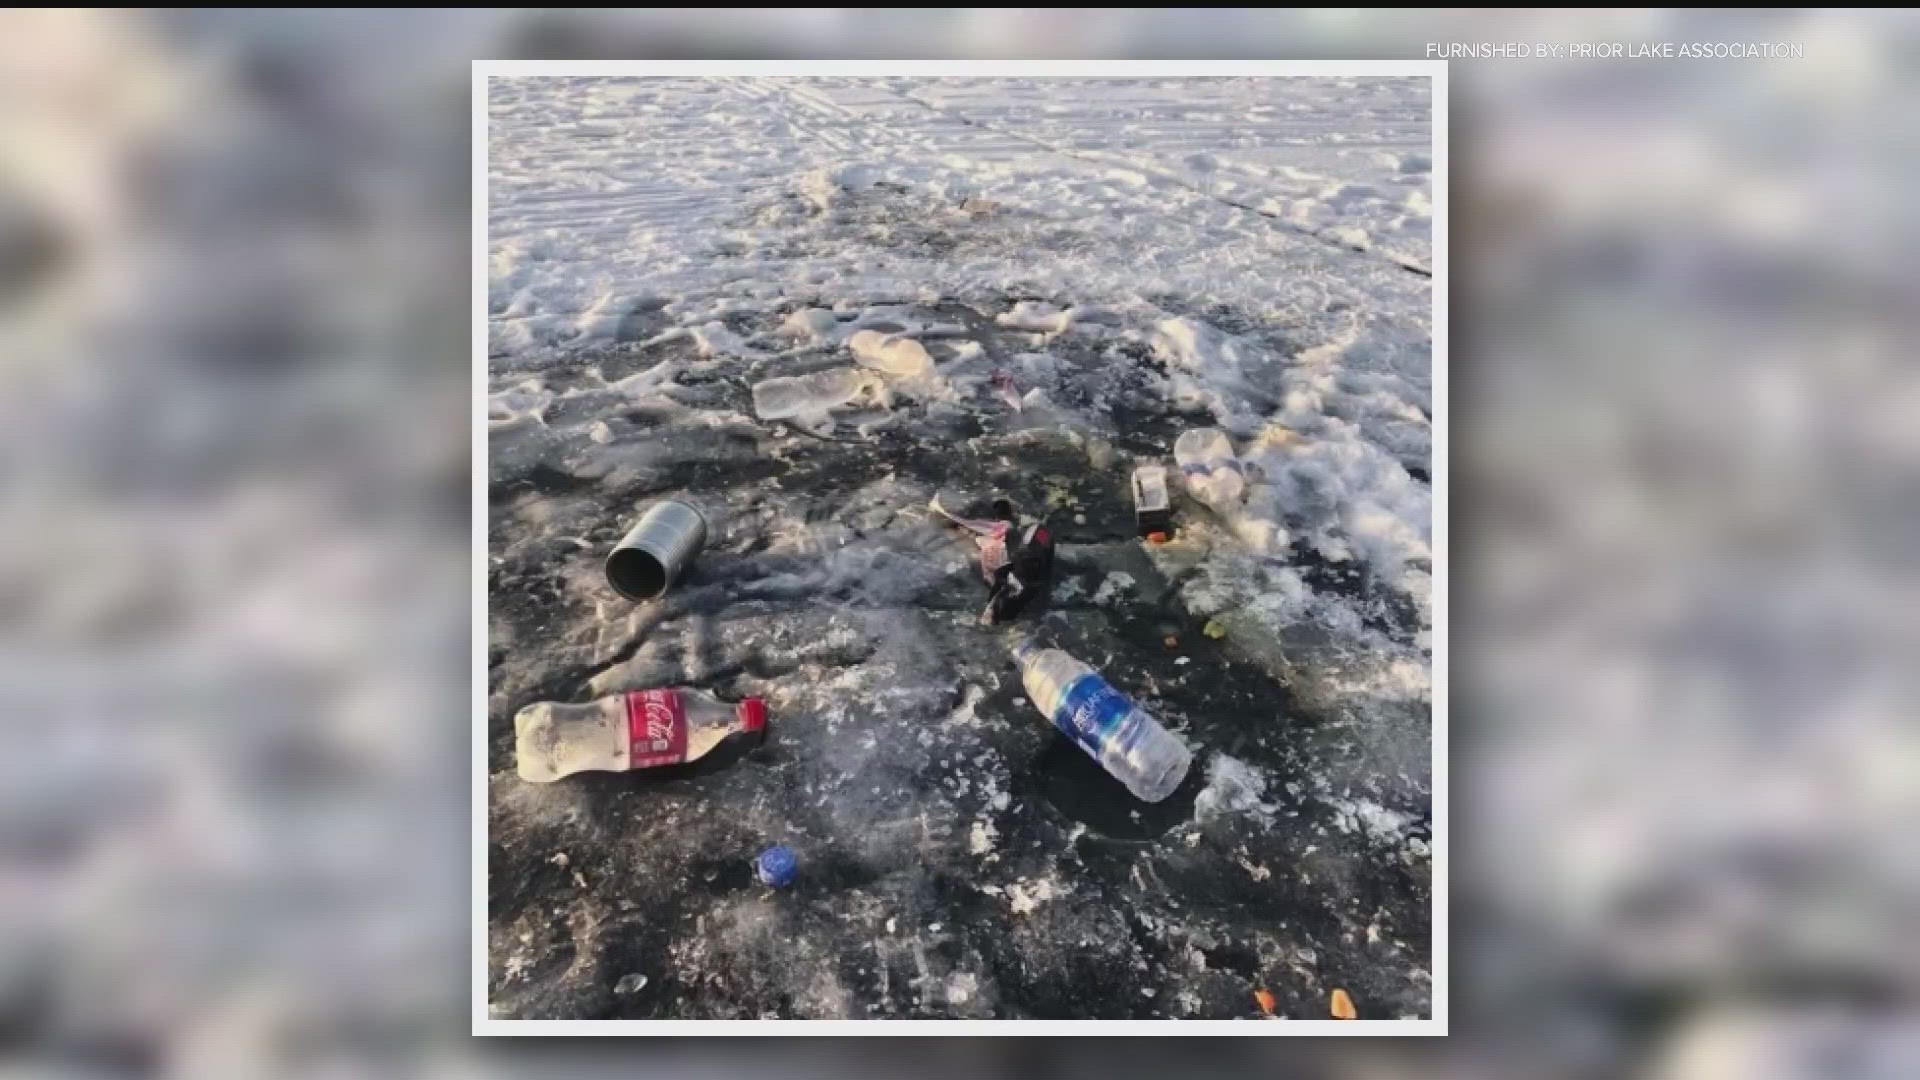 Volunteers are pushing for new legislation to combat trash left behind after ice fishing.